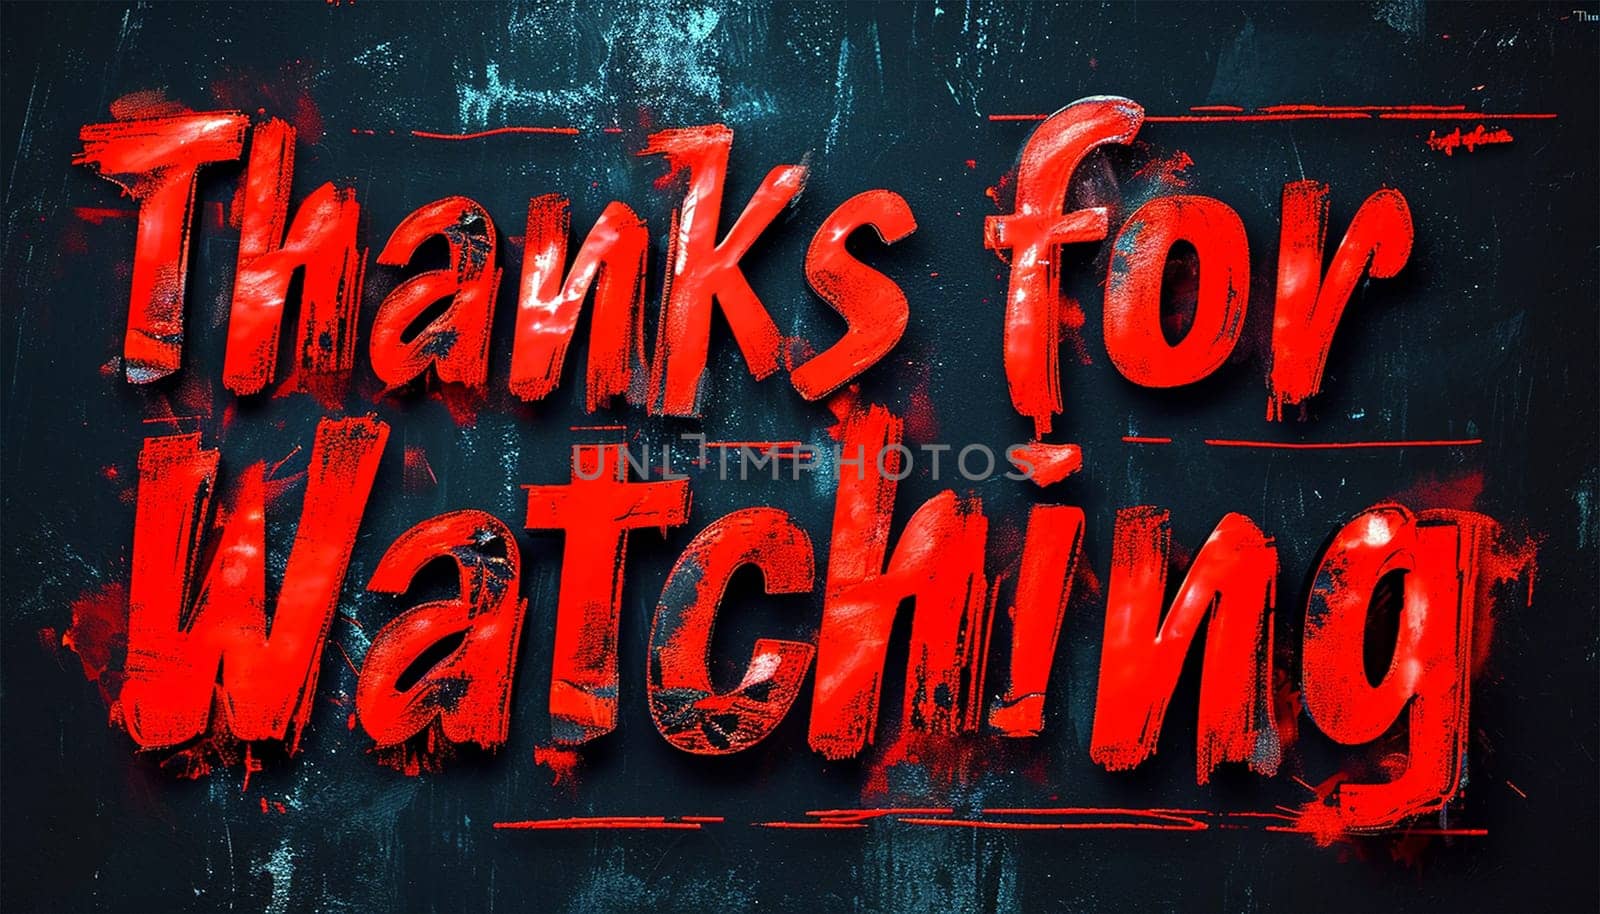 Tv screen with the text Thanks for watching. Animated trailer saying thank you for watching,Neon style in living room, perfect for intros, outros, countdowns, content, tech, slides, movies, cinematics, video editing, etc. Movie